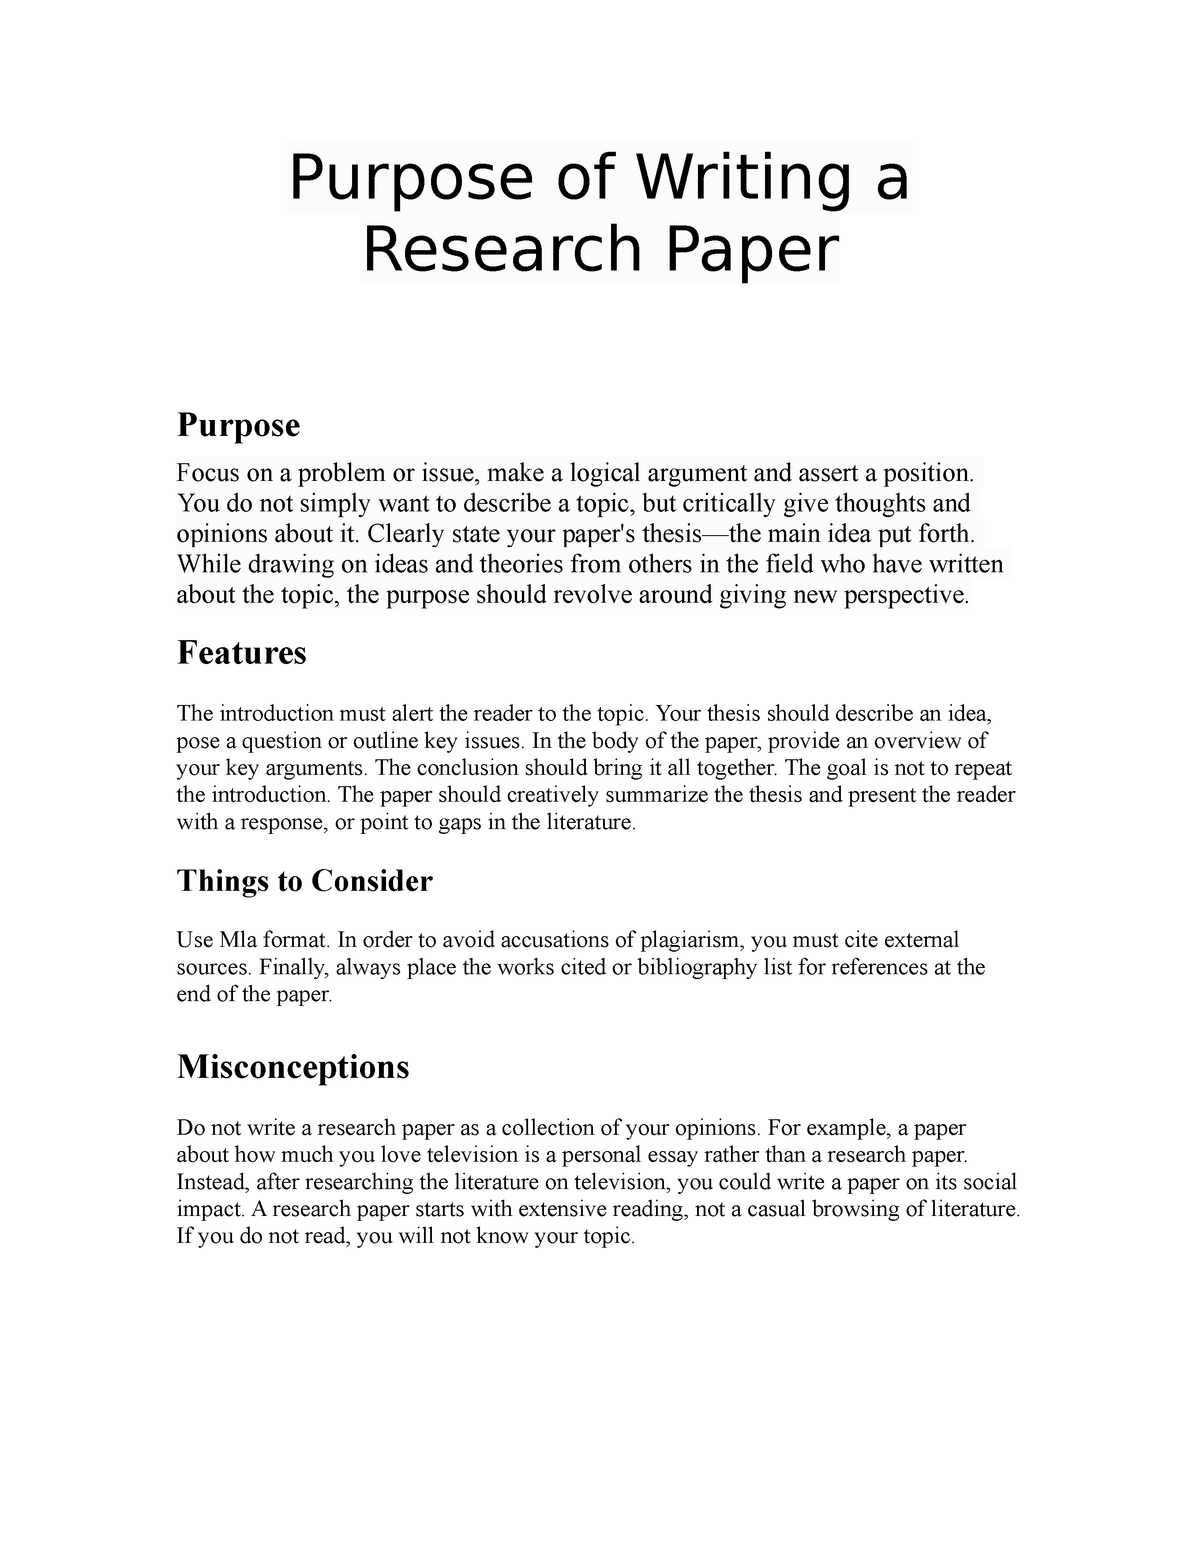 purpose of the research paper